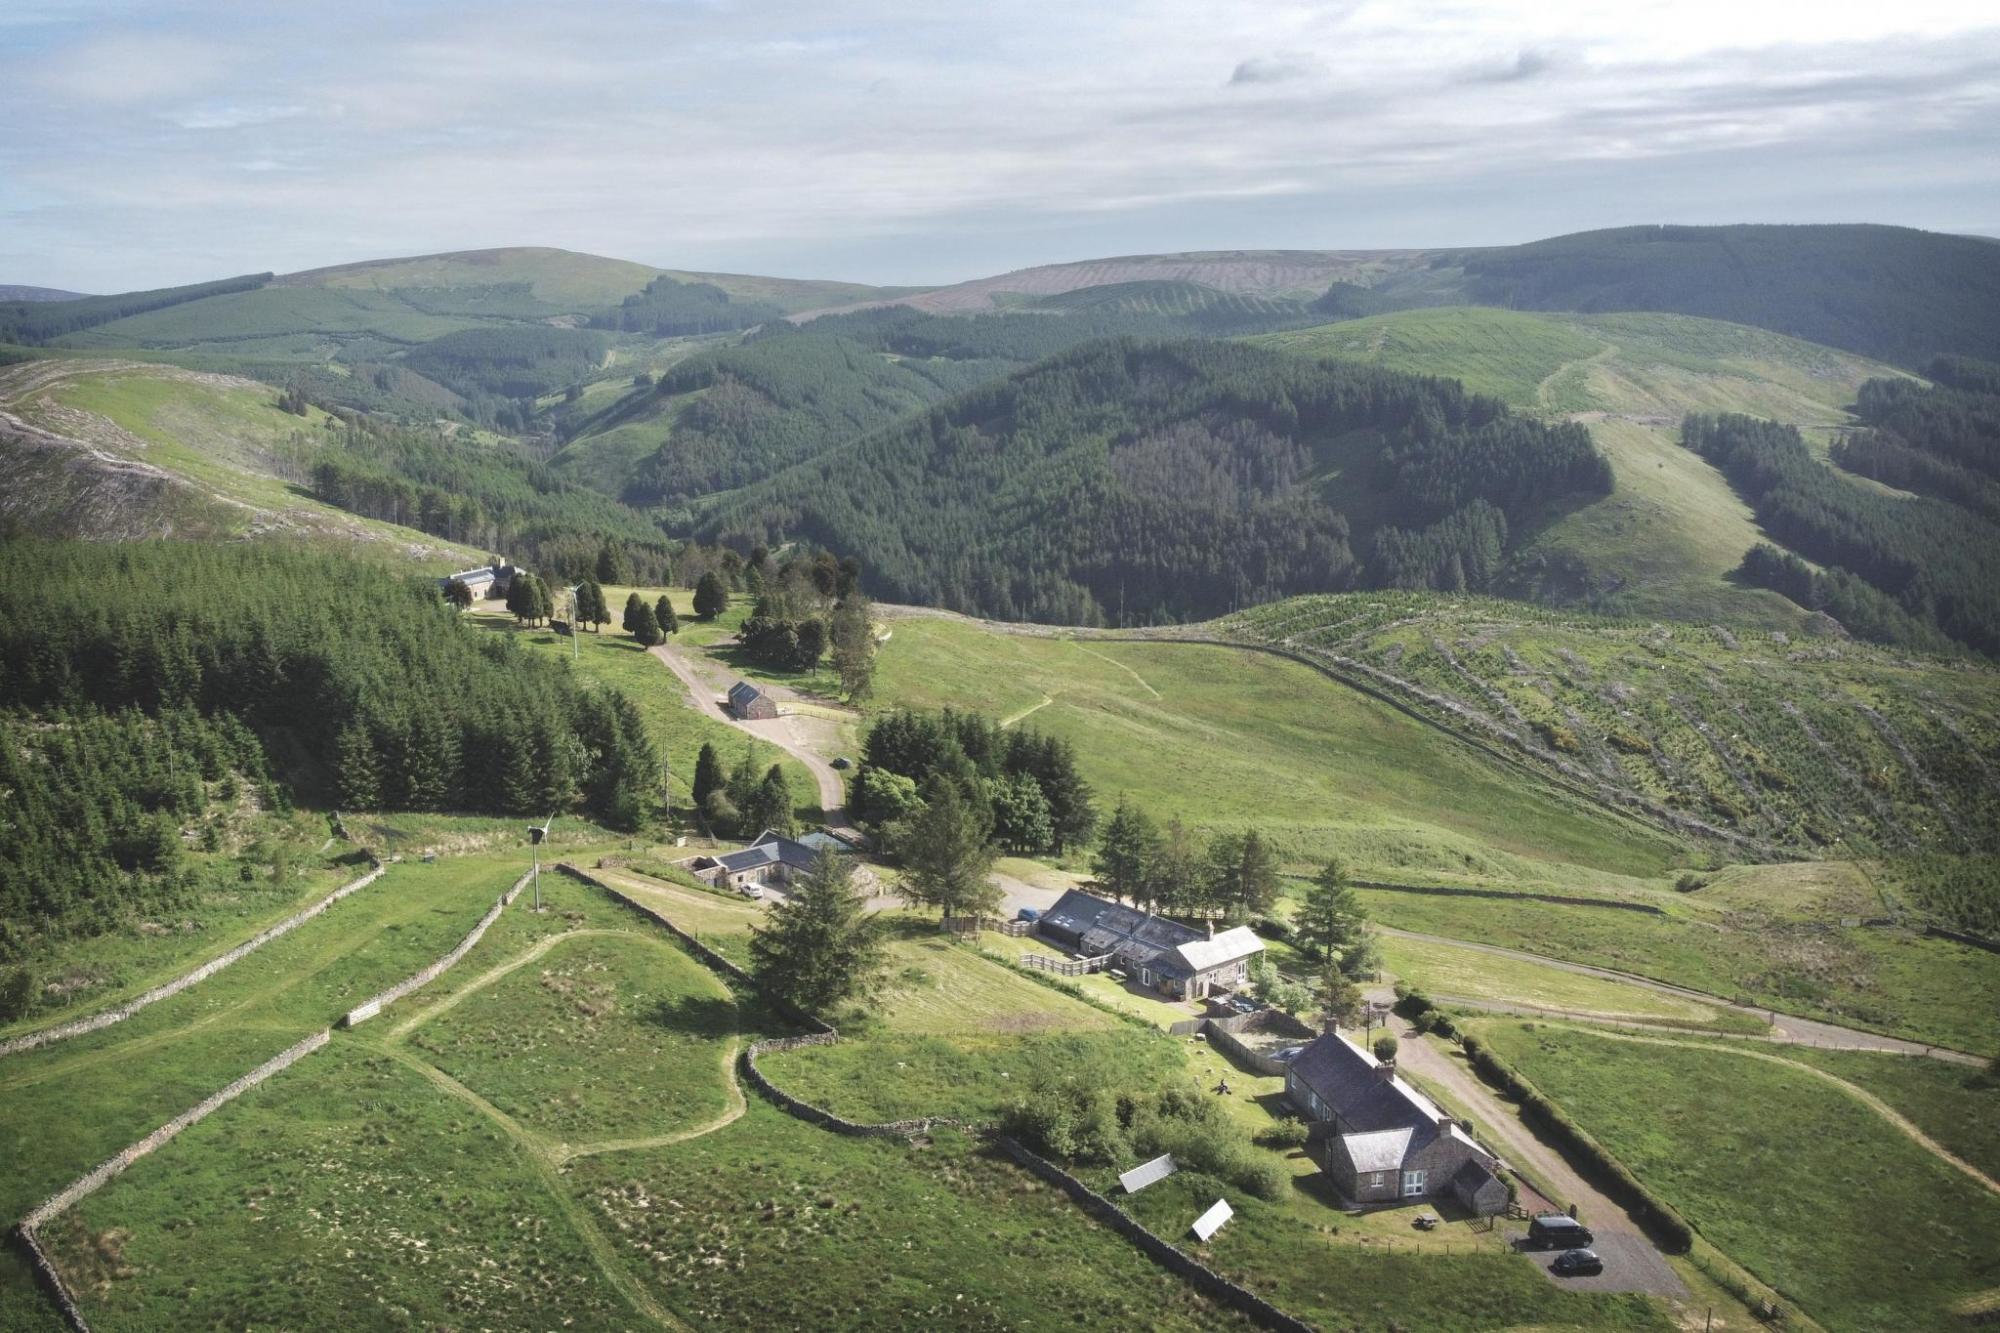 Aerial view of holiday cottages amid green hilly landscape